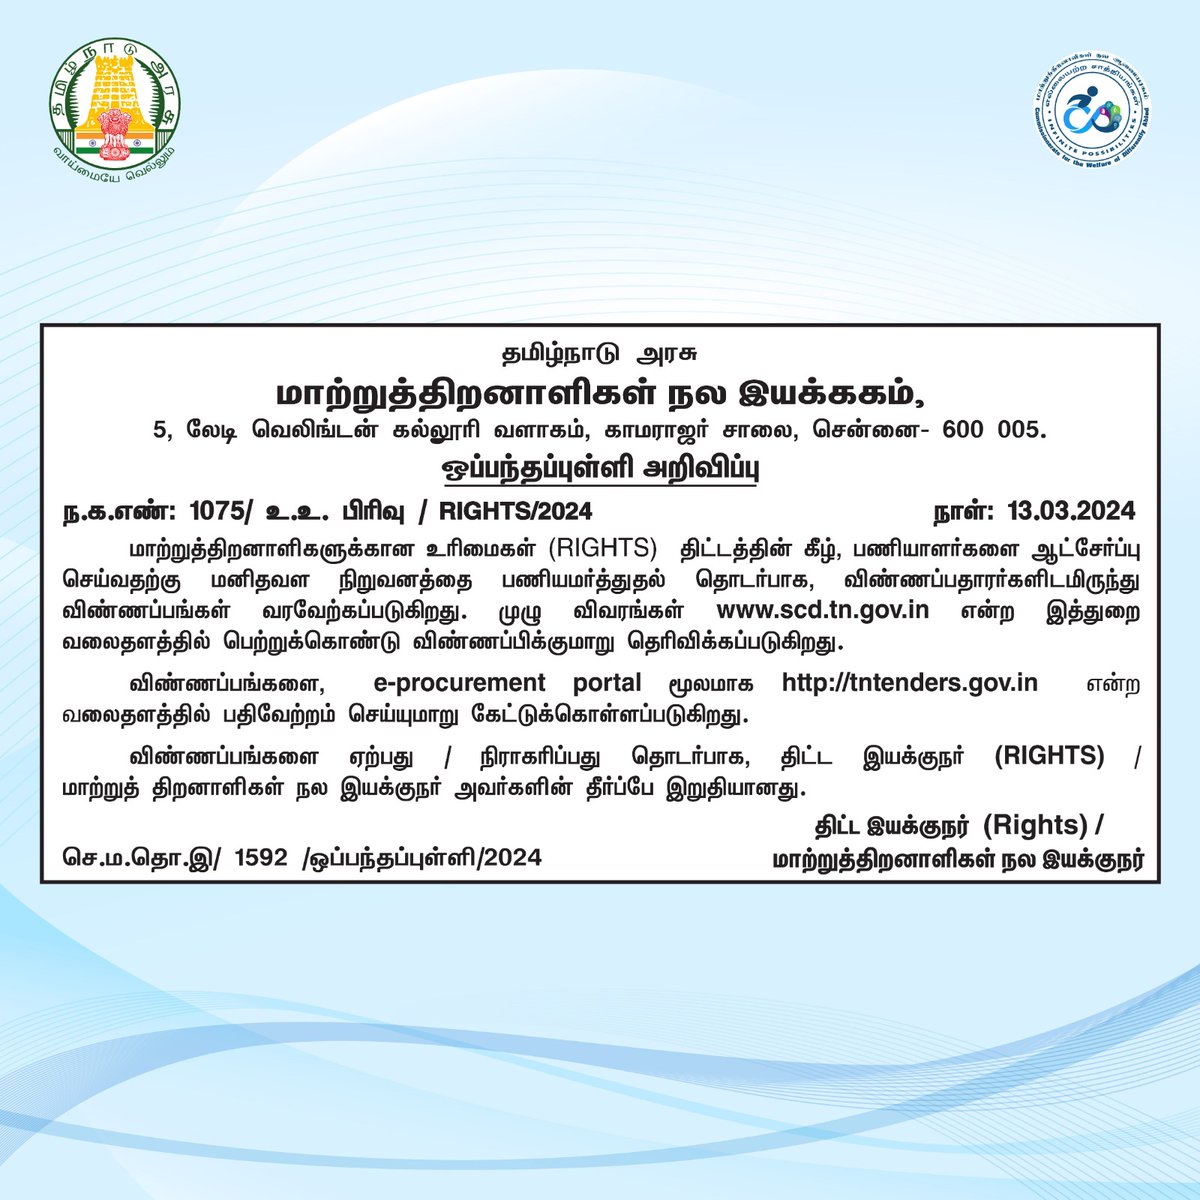 Commissionerate - Welfare of Differently Abled, TN (@Tn_Diff_abled) on Twitter photo 2024-03-14 07:50:04